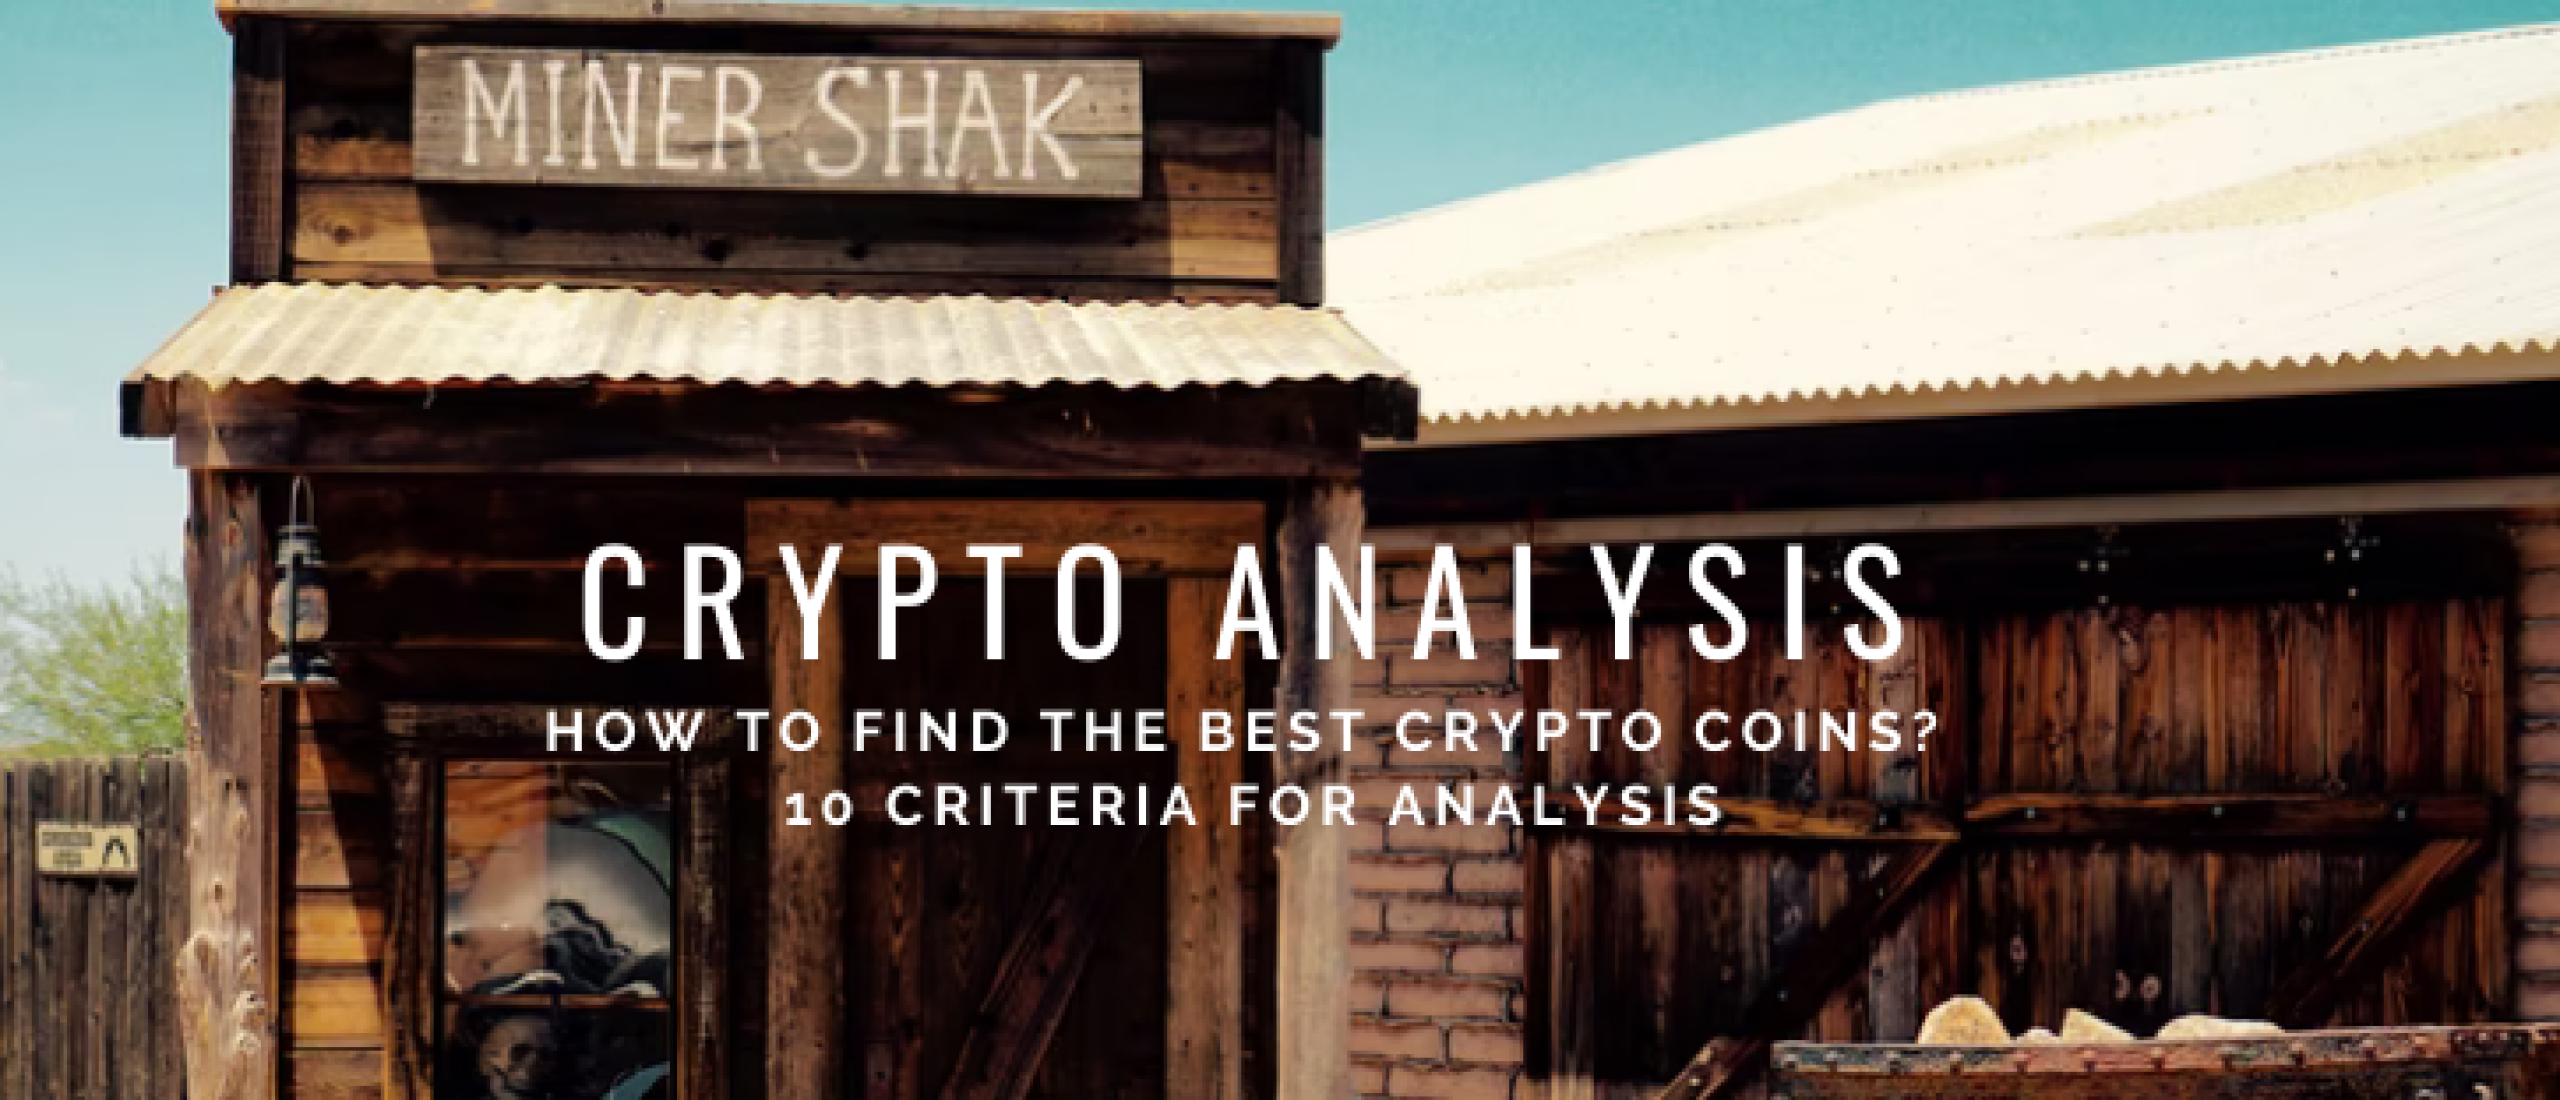 10x How To Find The Best Crypto Coins & Cryptocurrencies